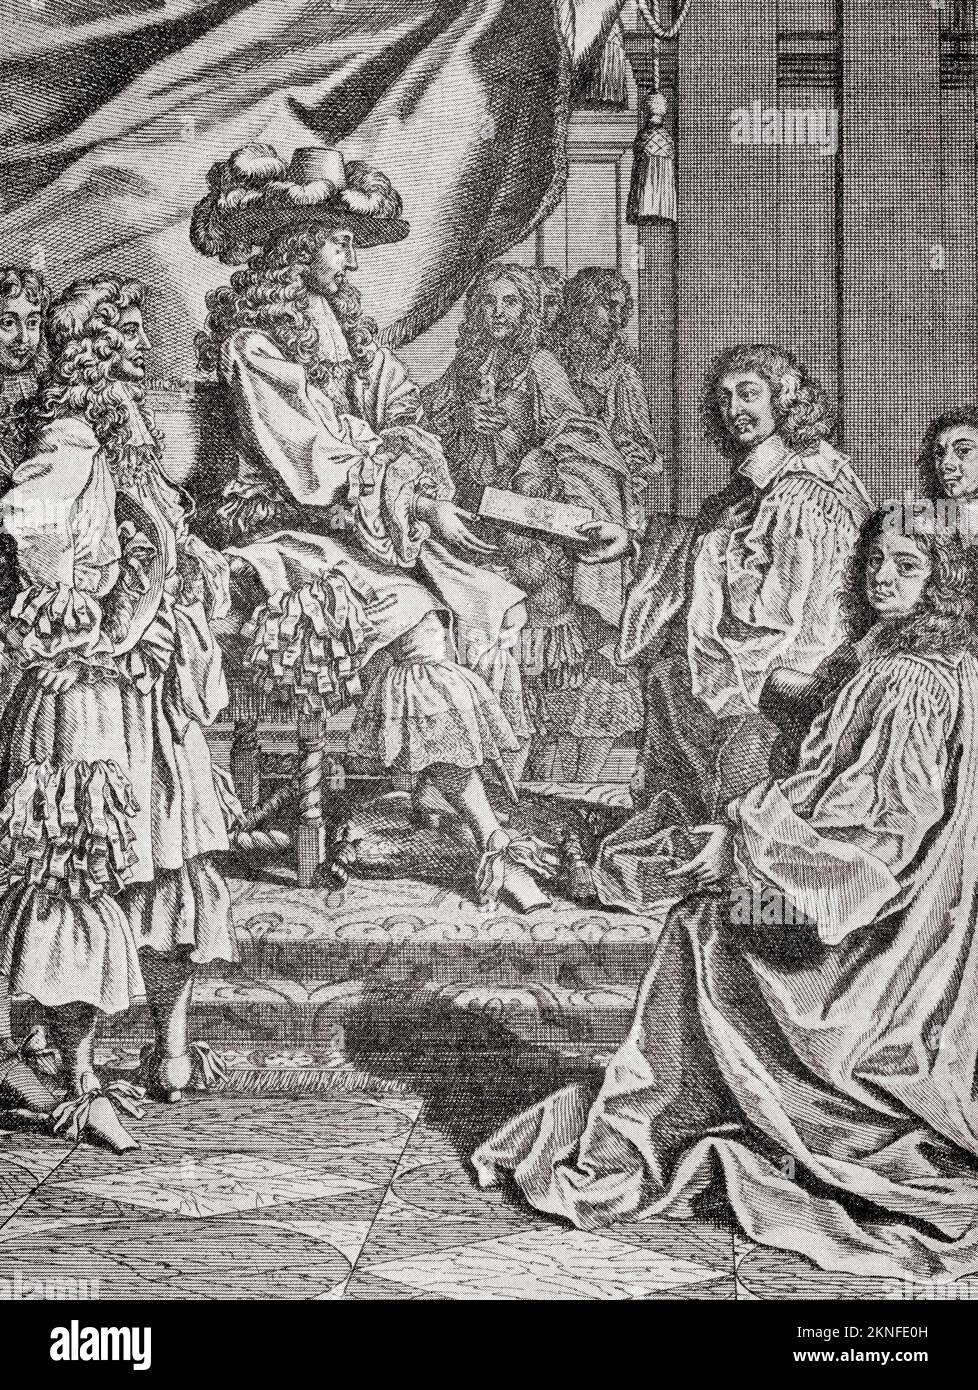 Louis XIV receiving an address on his entry into Paris, 1660.  Louis XIV, 1638 – 1715, aka Louis the Great or the Sun King. King of France, 1643 -1715.  From Modes and Manners, published 1935. Stock Photo